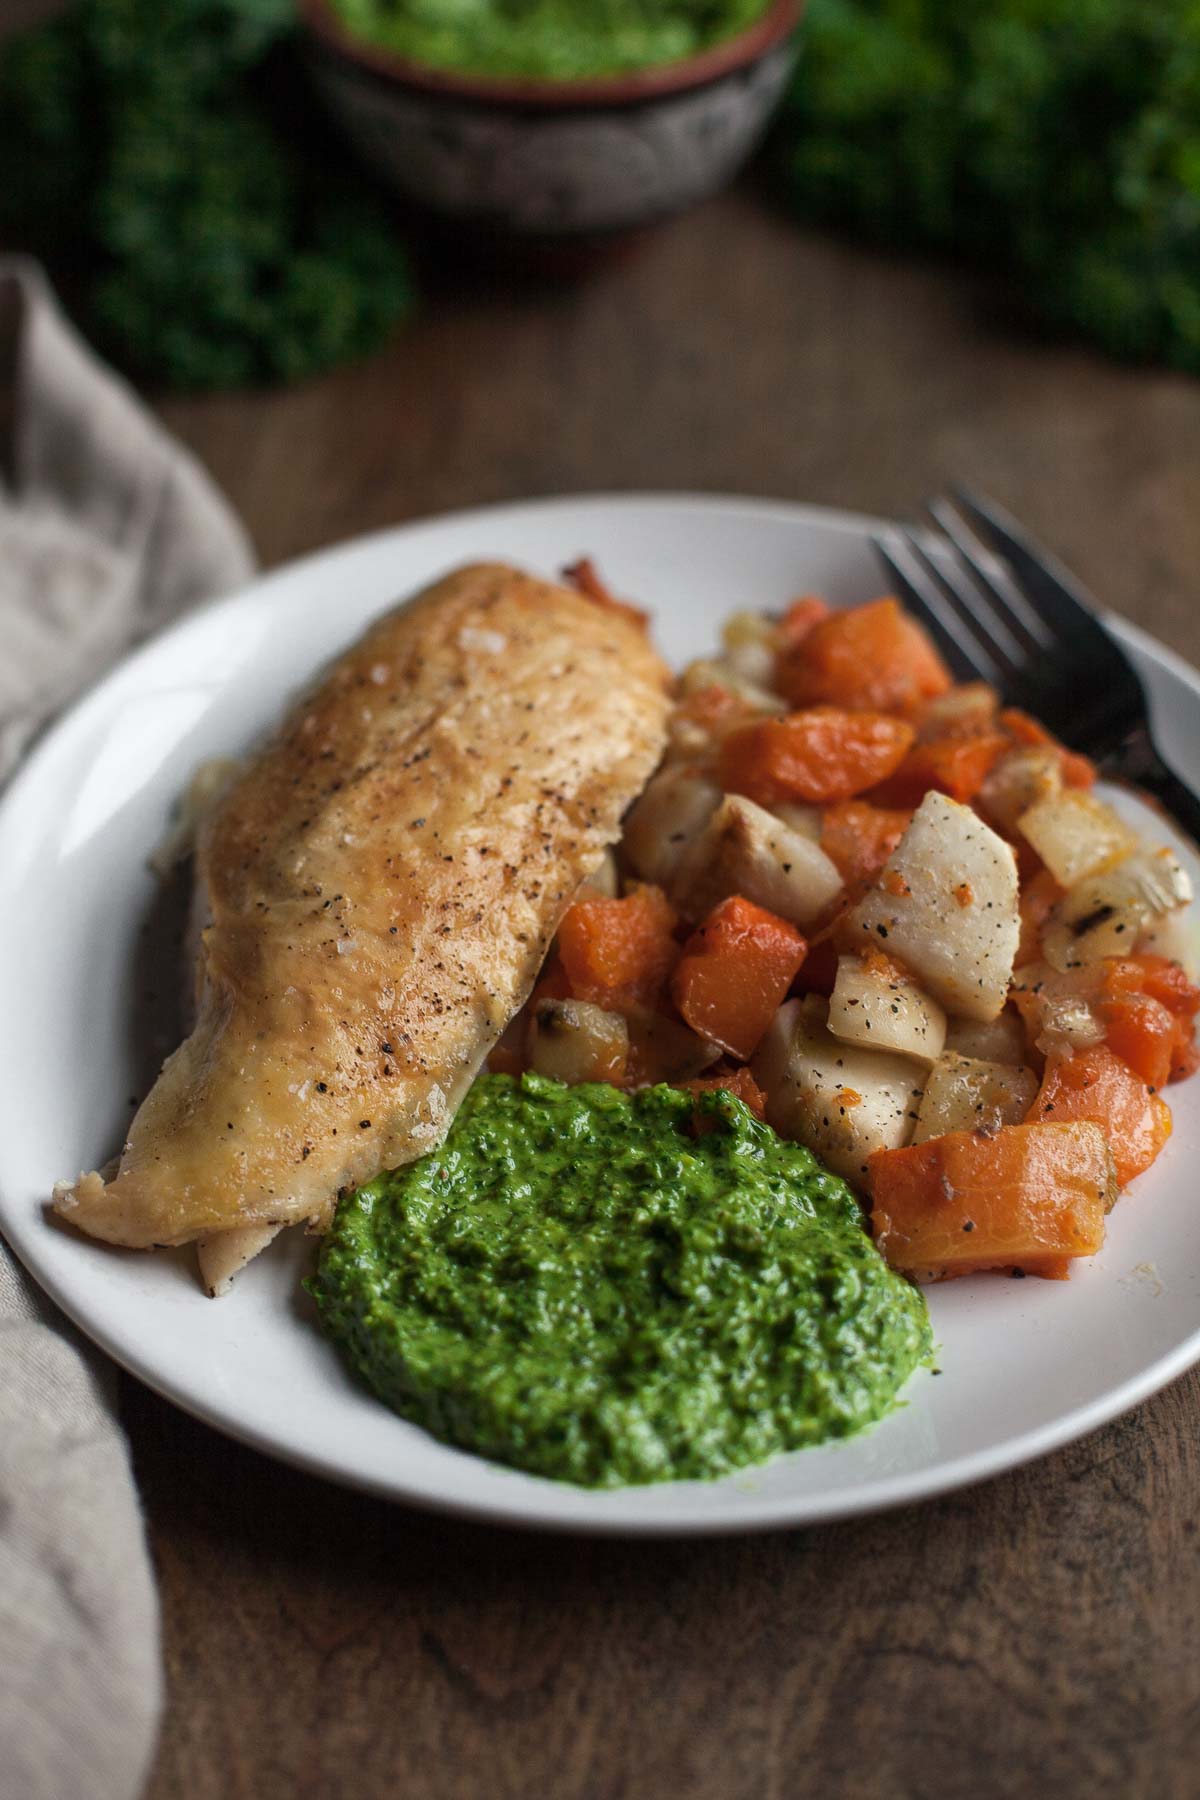 Chicken, pesto, and roasted vegetables